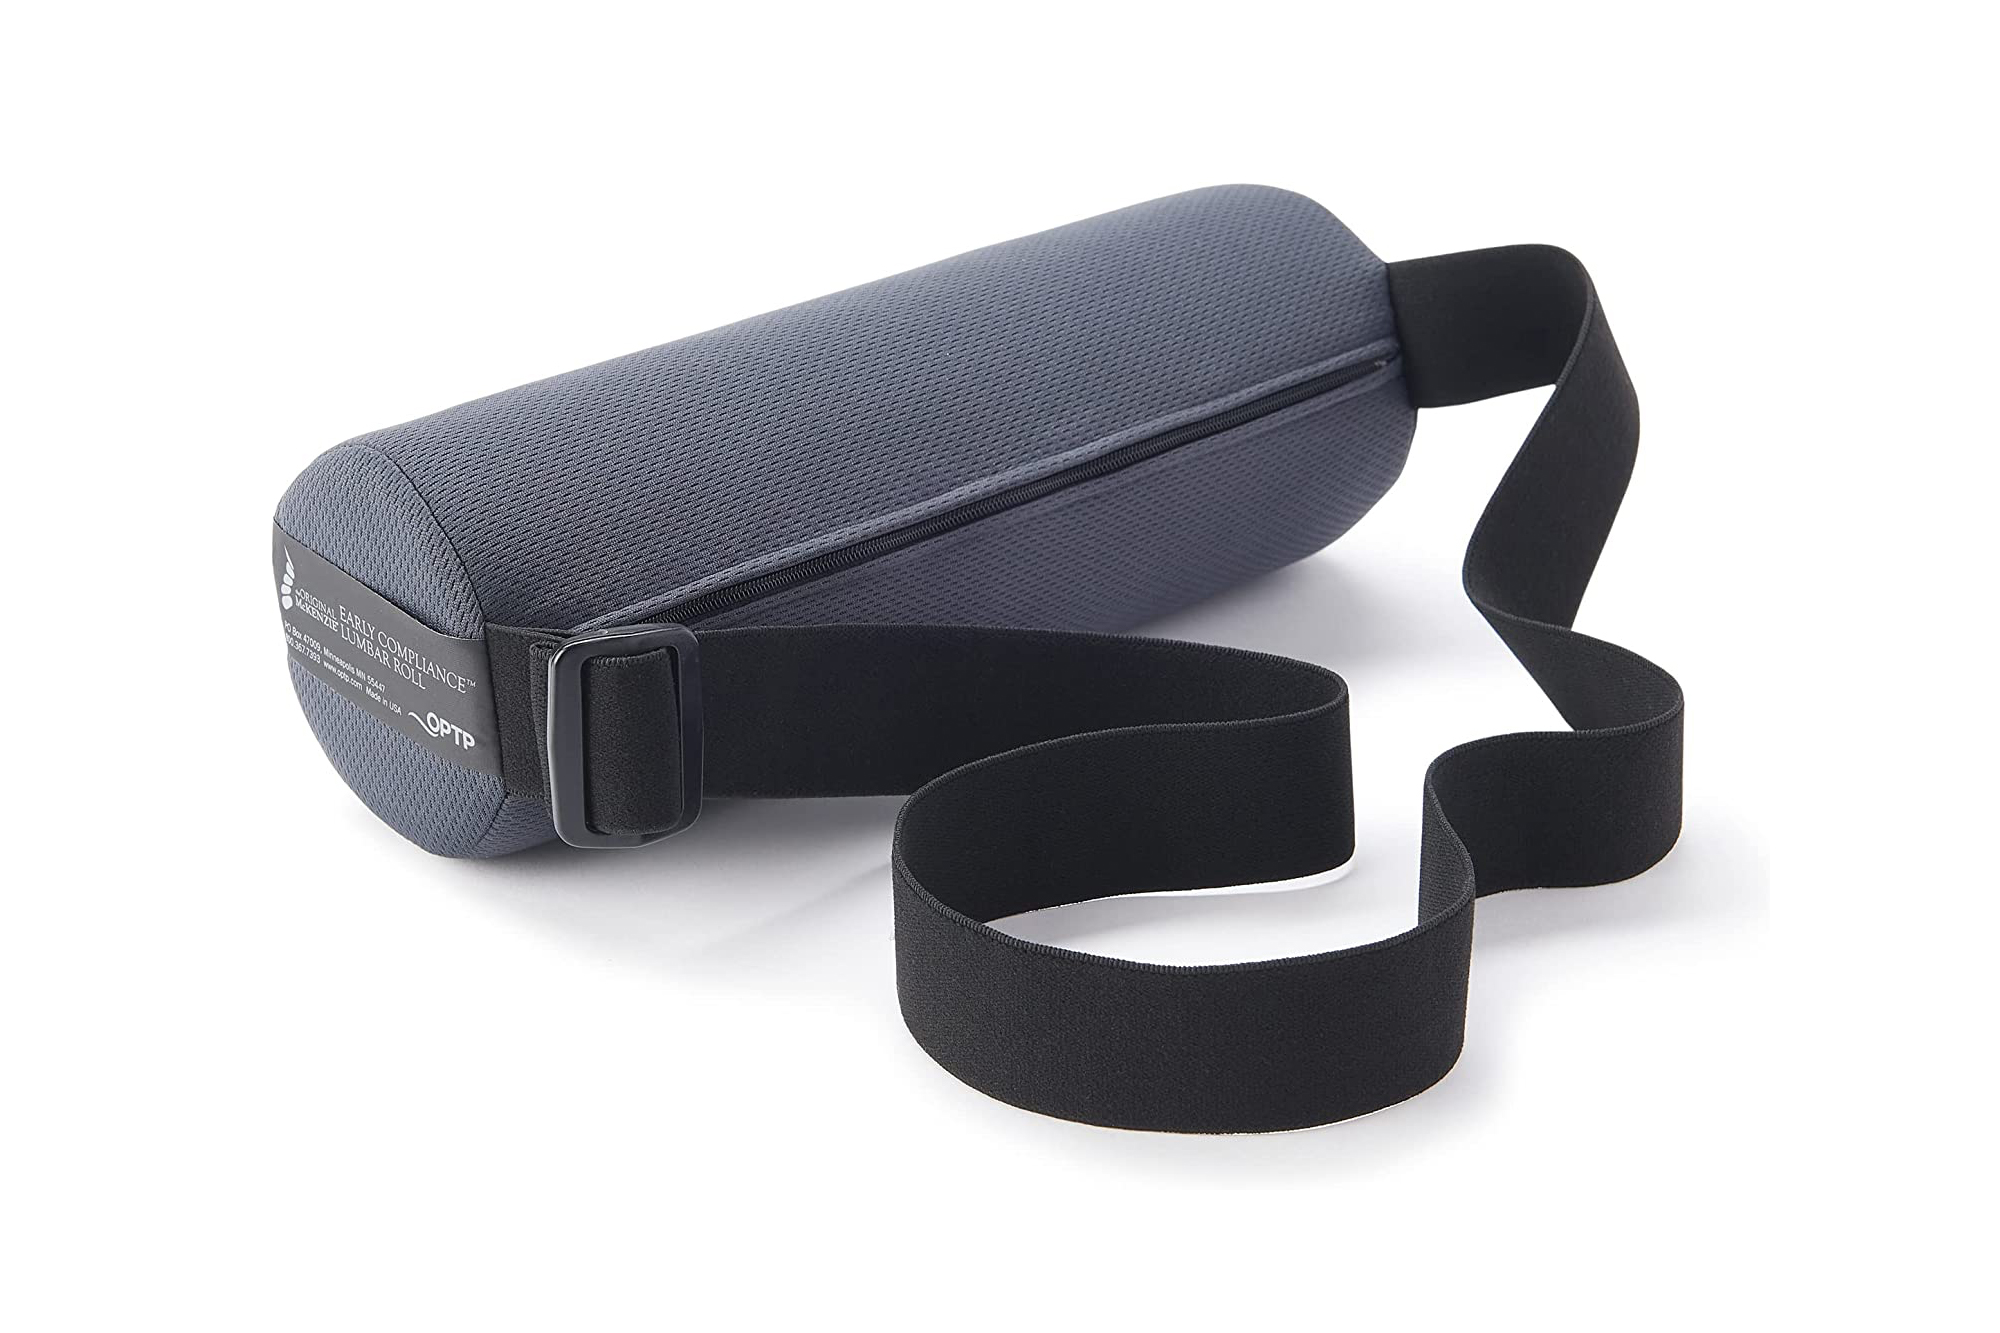 Check Our Top Recommendations for Travel Lumbar Support